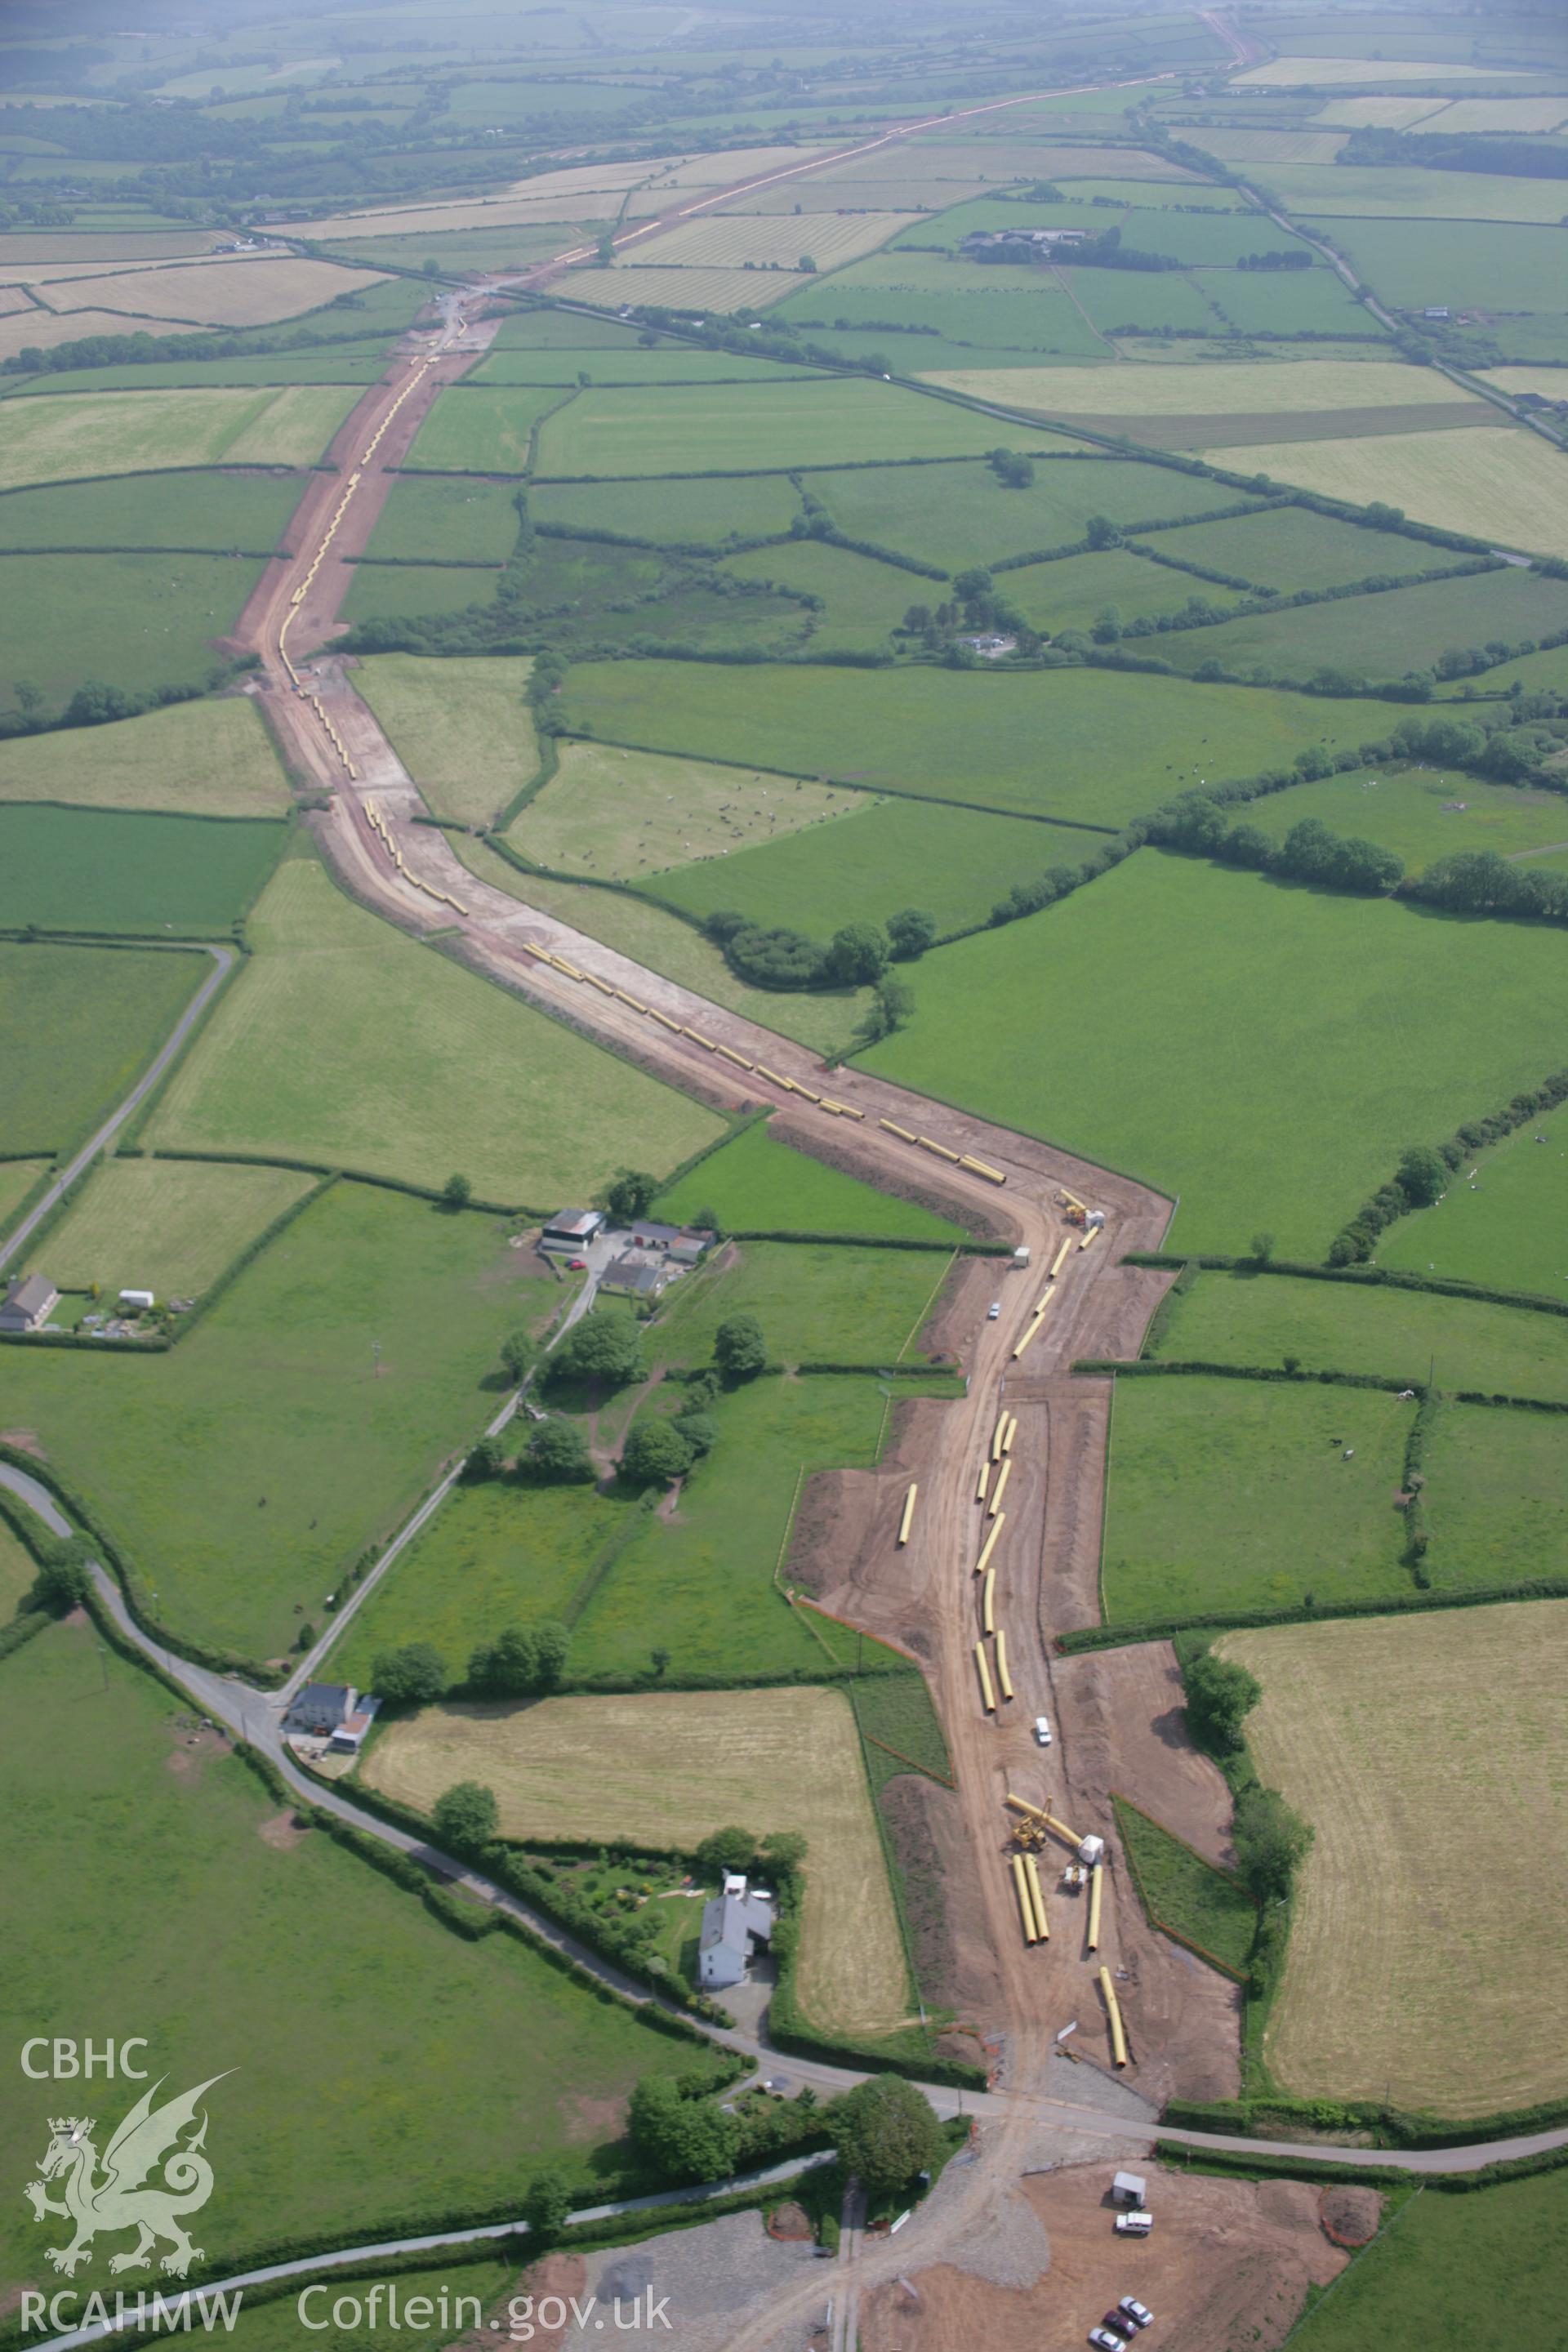 RCAHMW colour oblique aerial photograph of LNG Natural Gas Pipeline, Tavernspite, viewed looking to the east. Taken on 15 June 2006 by Toby Driver.